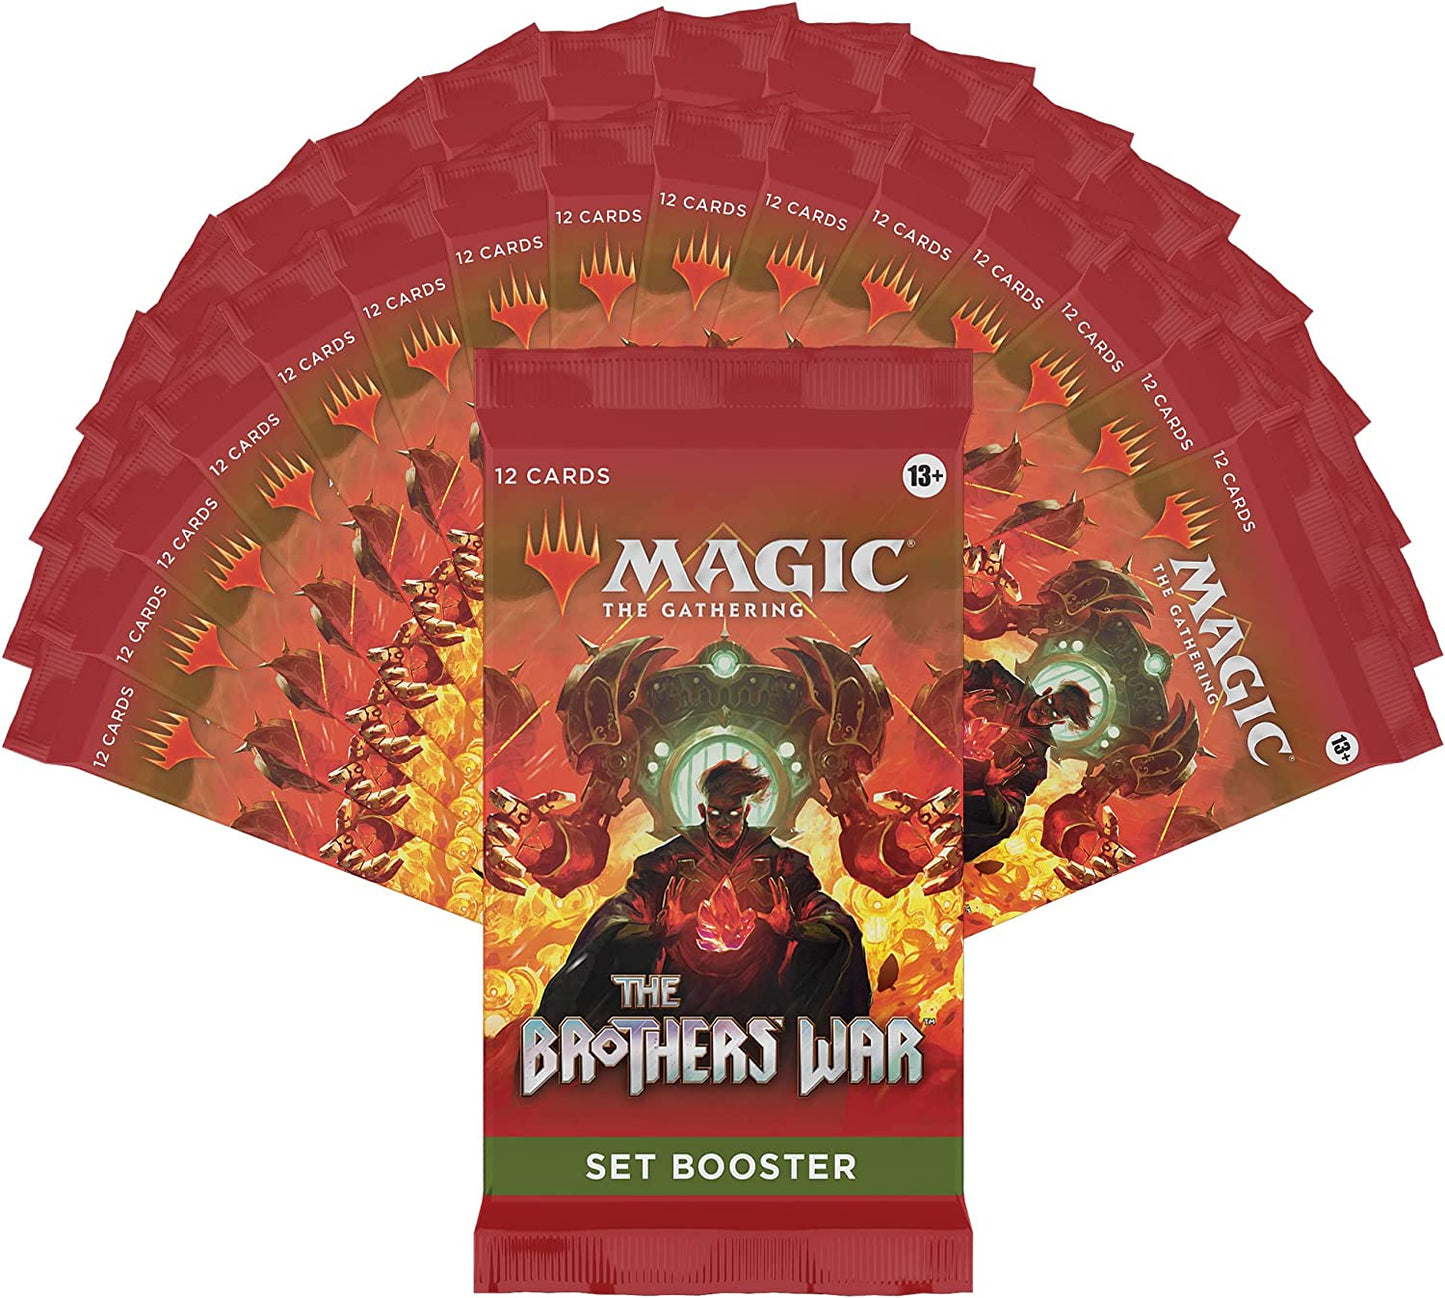 Magic: The Gathering - The Brother's War - Set Booster